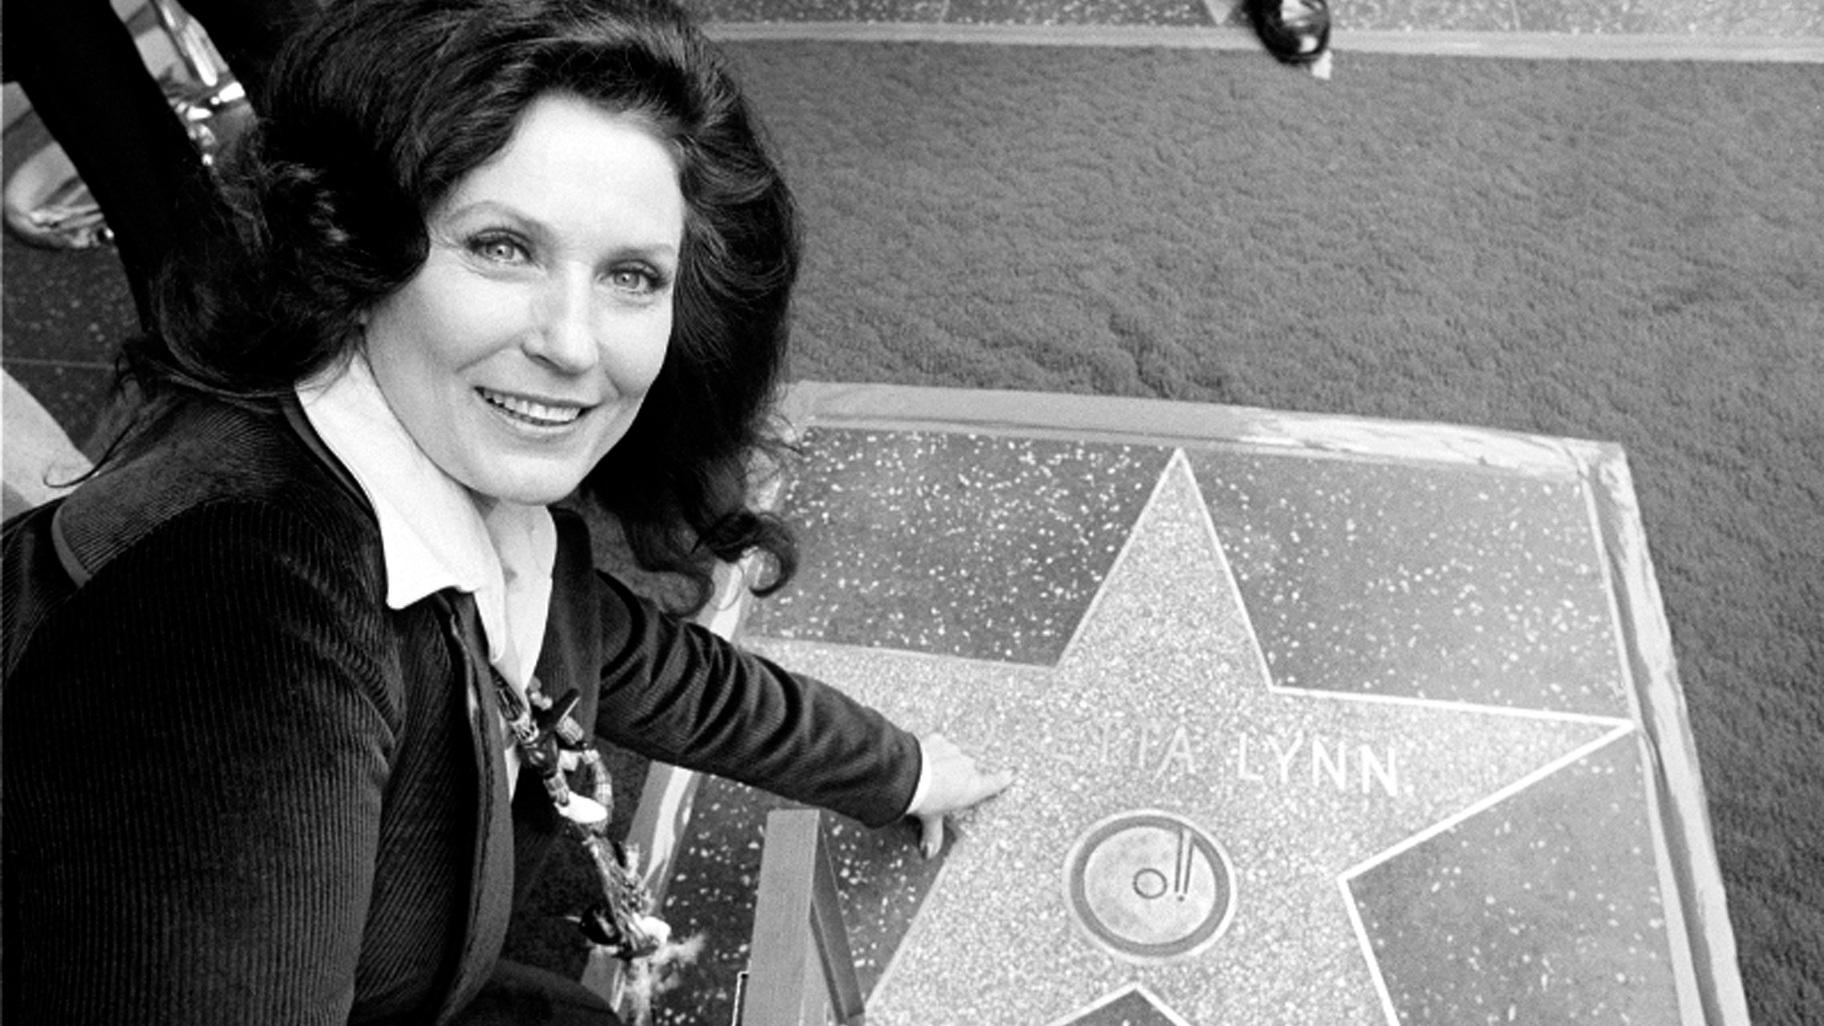 Country music singer Loretta Lynn points to her Hollywood Walk of Fame star during induction ceremonies in Hollywood, Calif., on Feb. 8, 1978. (AP Photo / File)